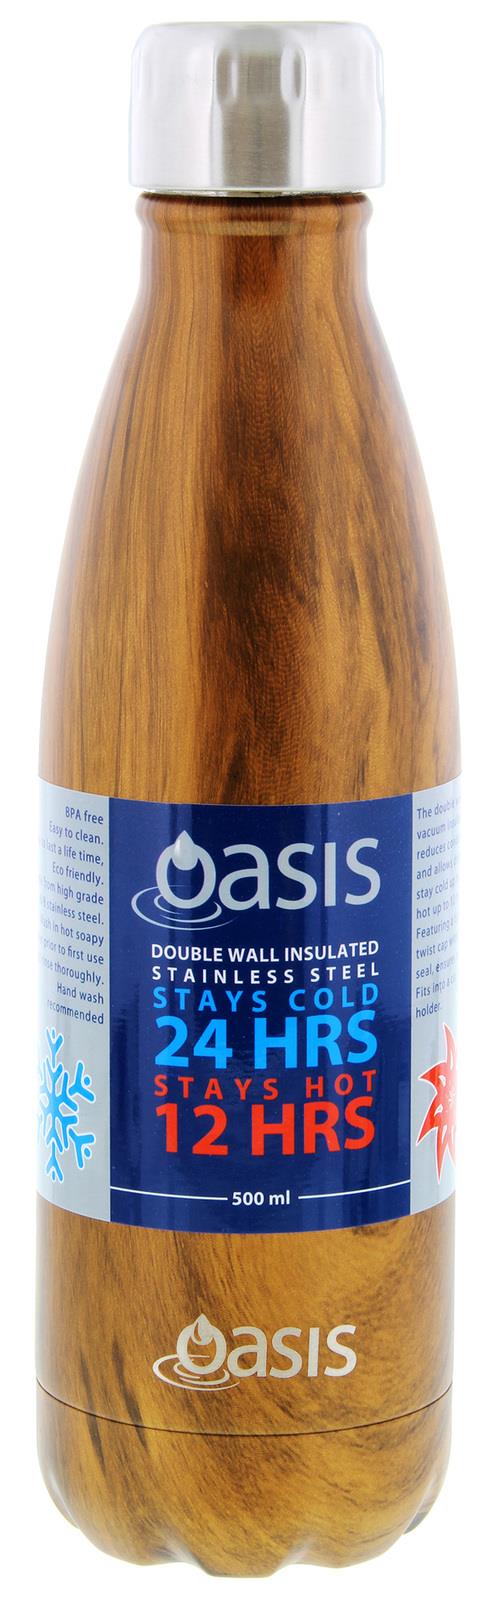 Oasis Insulated Stainless Steel Water Bottle - Teak (500ml) - D.Line